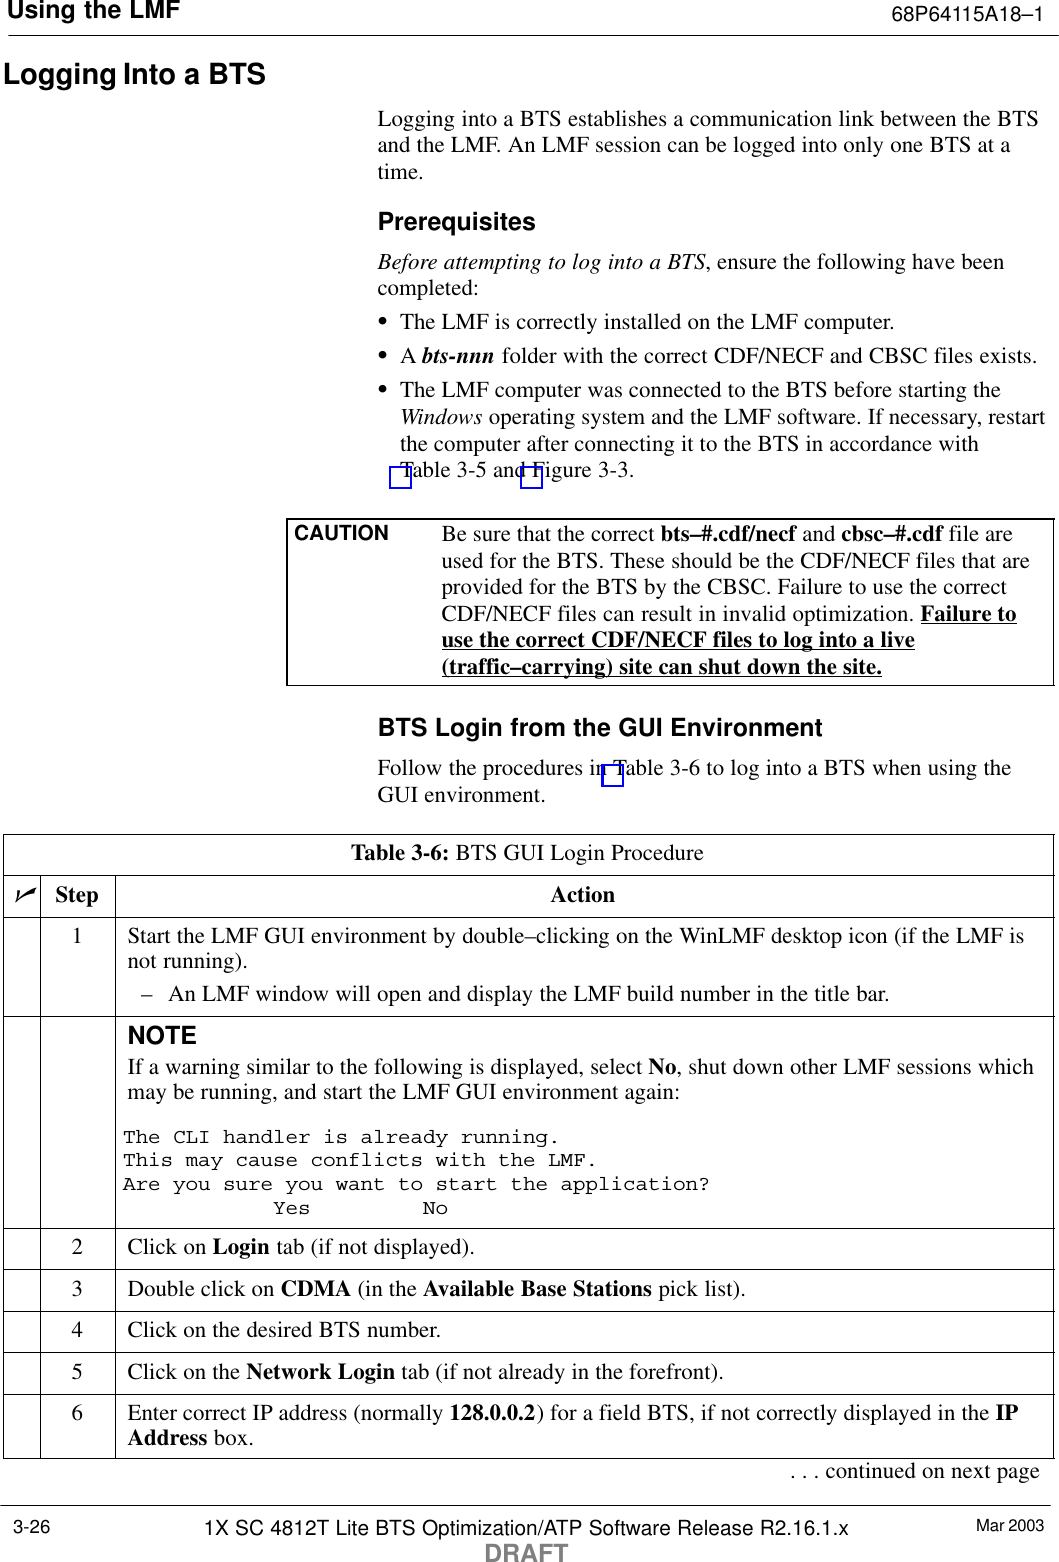 Using the LMF 68P64115A18–1Mar 20031X SC 4812T Lite BTS Optimization/ATP Software Release R2.16.1.xDRAFT3-26Logging Into a BTSLogging into a BTS establishes a communication link between the BTSand the LMF. An LMF session can be logged into only one BTS at atime.PrerequisitesBefore attempting to log into a BTS, ensure the following have beencompleted:SThe LMF is correctly installed on the LMF computer.SA bts-nnn folder with the correct CDF/NECF and CBSC files exists.SThe LMF computer was connected to the BTS before starting theWindows operating system and the LMF software. If necessary, restartthe computer after connecting it to the BTS in accordance withTable 3-5 and Figure 3-3.CAUTION Be sure that the correct bts–#.cdf/necf and cbsc–#.cdf file areused for the BTS. These should be the CDF/NECF files that areprovided for the BTS by the CBSC. Failure to use the correctCDF/NECF files can result in invalid optimization. Failure touse the correct CDF/NECF files to log into a live(traffic–carrying) site can shut down the site.BTS Login from the GUI EnvironmentFollow the procedures in Table 3-6 to log into a BTS when using theGUI environment.Table 3-6: BTS GUI Login ProcedurenStep Action1Start the LMF GUI environment by double–clicking on the WinLMF desktop icon (if the LMF isnot running).– An LMF window will open and display the LMF build number in the title bar.NOTEIf a warning similar to the following is displayed, select No, shut down other LMF sessions whichmay be running, and start the LMF GUI environment again:The CLI handler is already running.This may cause conflicts with the LMF.Are you sure you want to start the application?Yes No2Click on Login tab (if not displayed).3Double click on CDMA (in the Available Base Stations pick list).4Click on the desired BTS number.5Click on the Network Login tab (if not already in the forefront).6Enter correct IP address (normally 128.0.0.2) for a field BTS, if not correctly displayed in the IPAddress box.. . . continued on next page